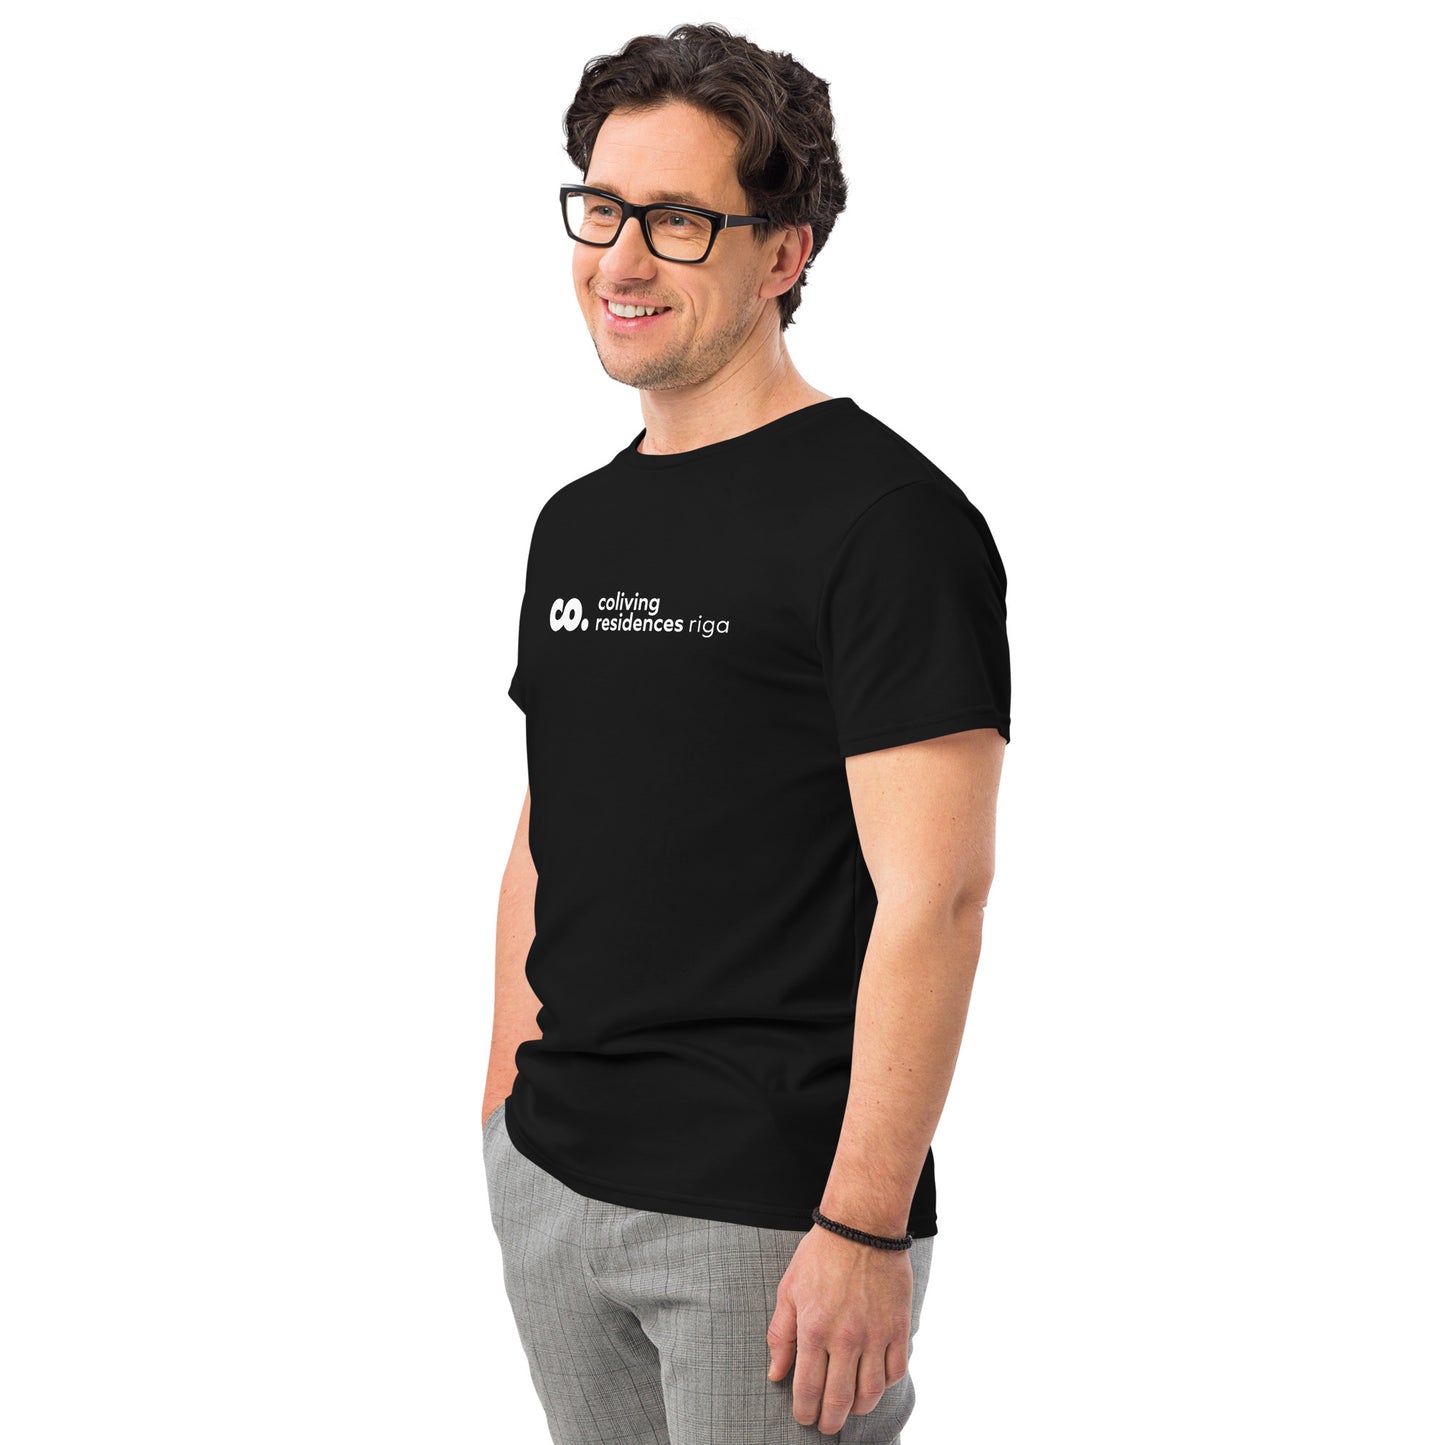 side view of a white man wearing a black t-shirt with logo of coliving residences riga